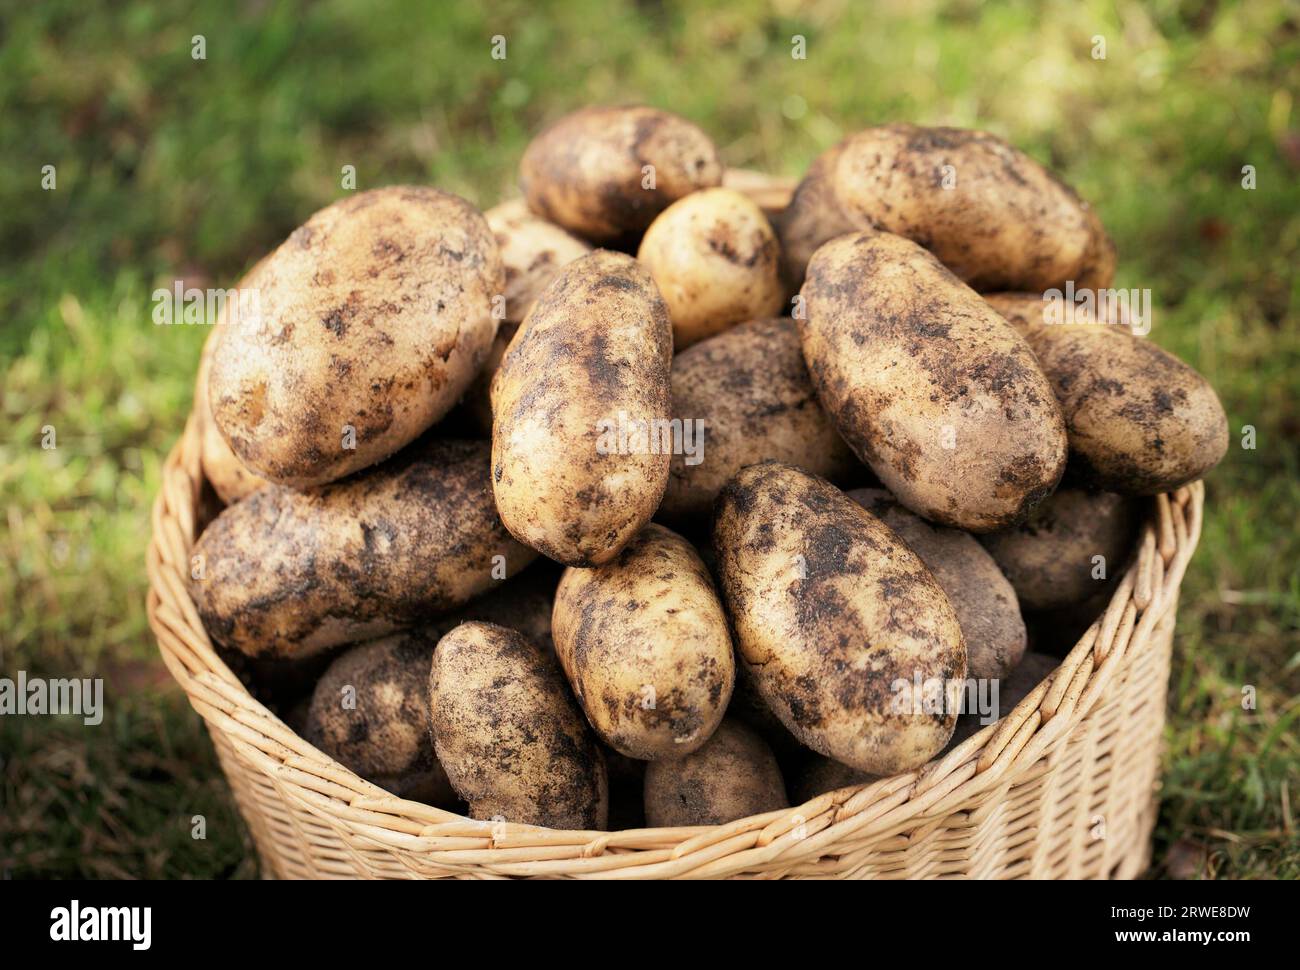 Harvested potatoes in a woven wicker basket Stock Photo